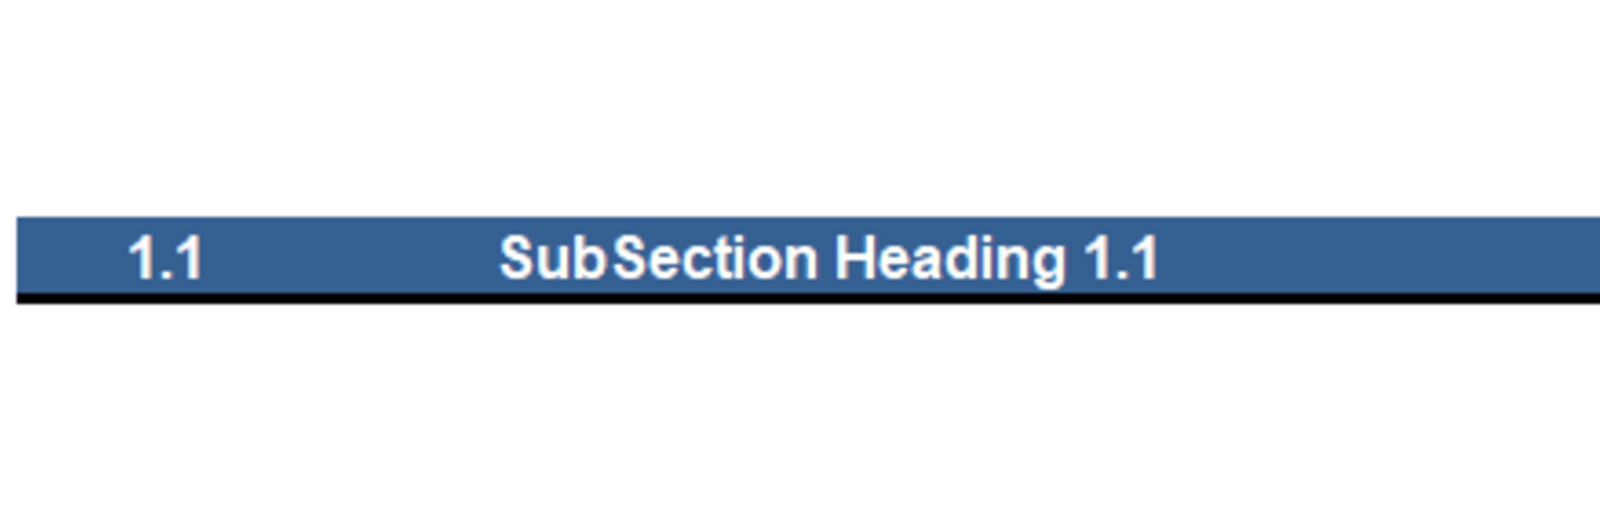 Subsection header example